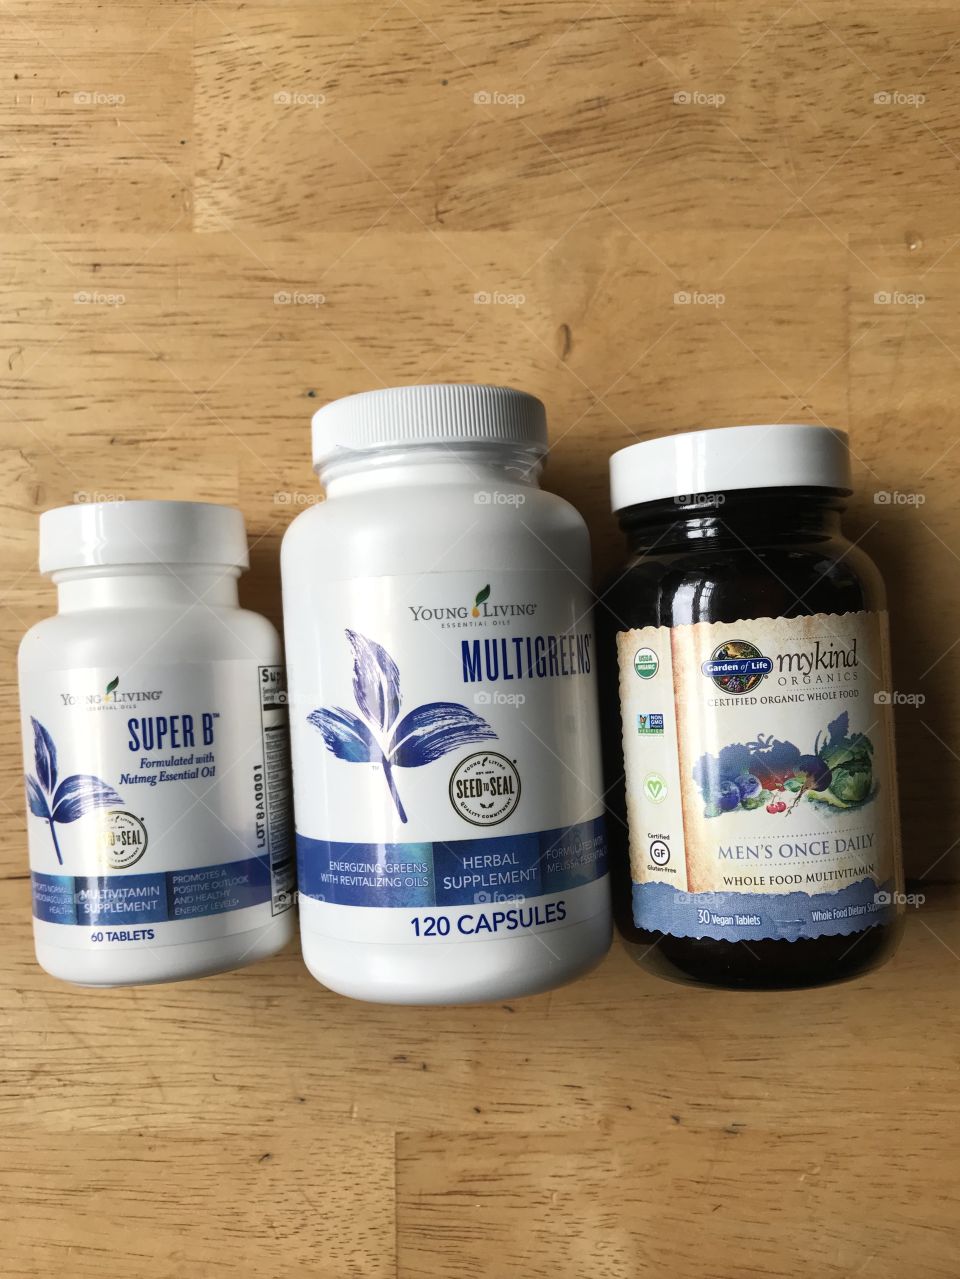 Supplemental support.  Brand the health and wellness of your business by showing how important you take your health.  Our bodies are our temples and should be treated as such.  Young Living supplements and Garden of Life multivitamins.